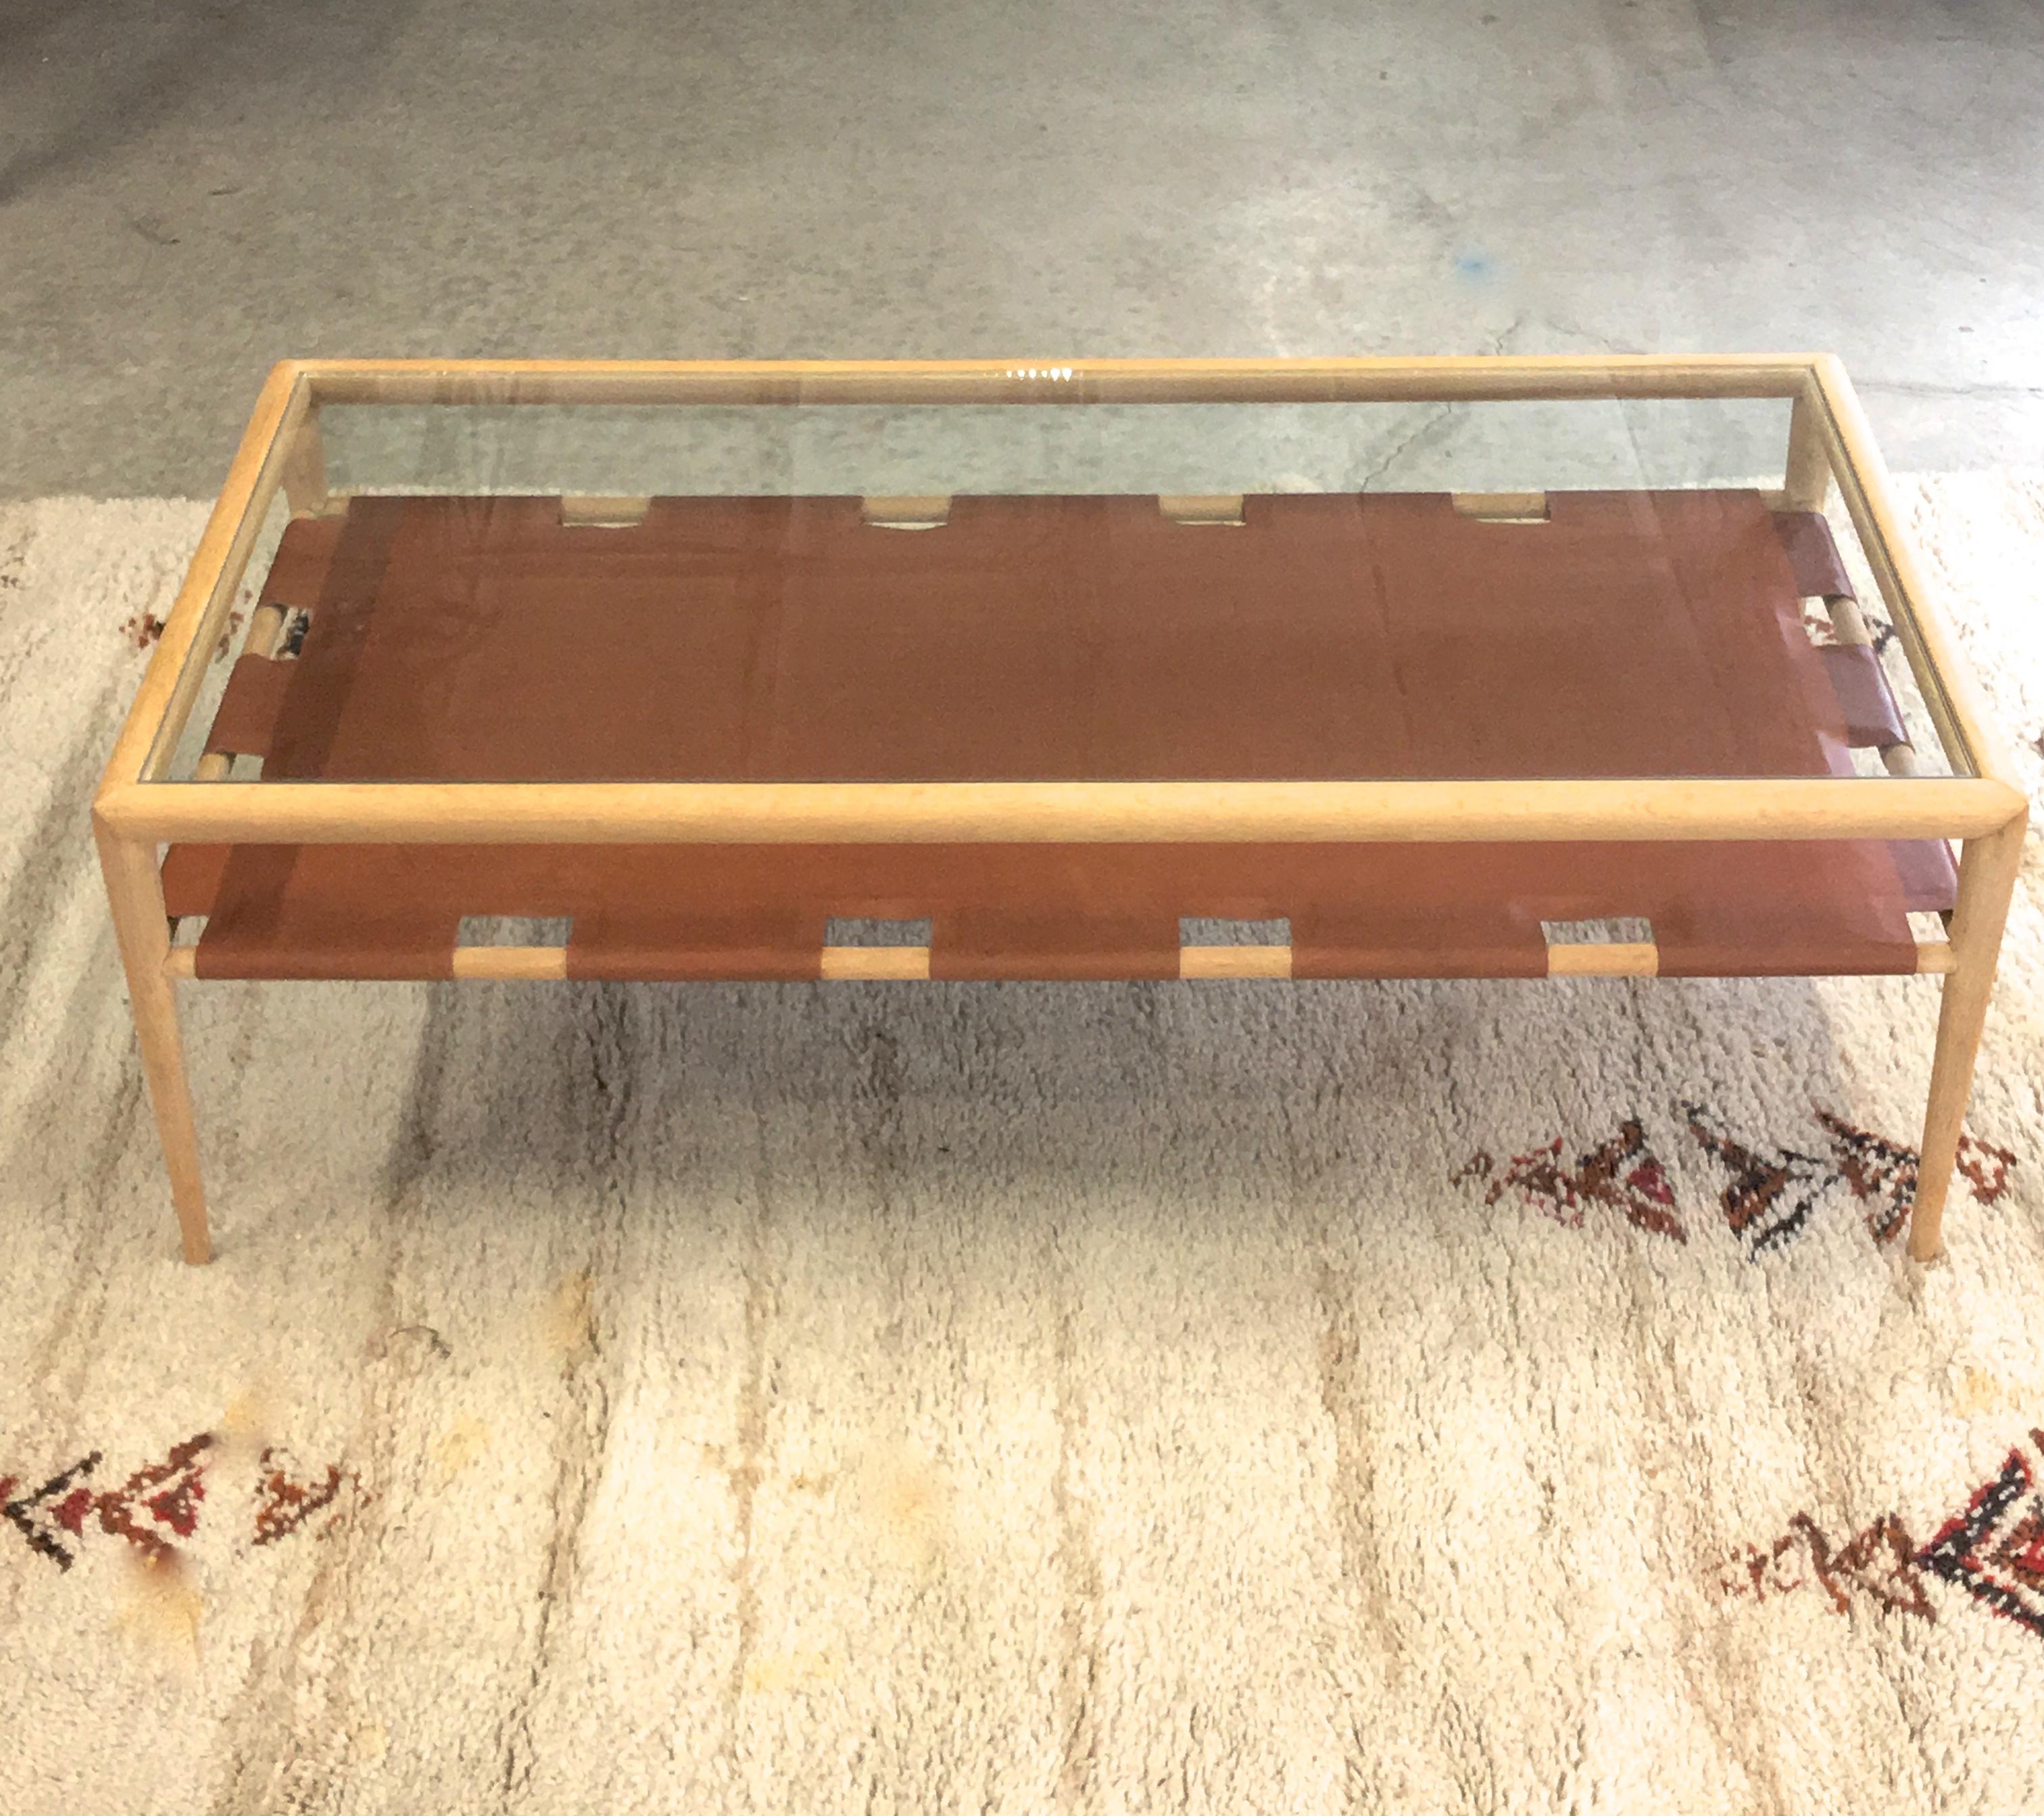 Robsjohn-Gibbings for Widdicomb two tier rectangular coffee table, light birchwood frame with tapered legs, single hide French calfskin cognac leather on board with crenelated tabs wrapped around stretchers, and new tempered glass top. Partial label